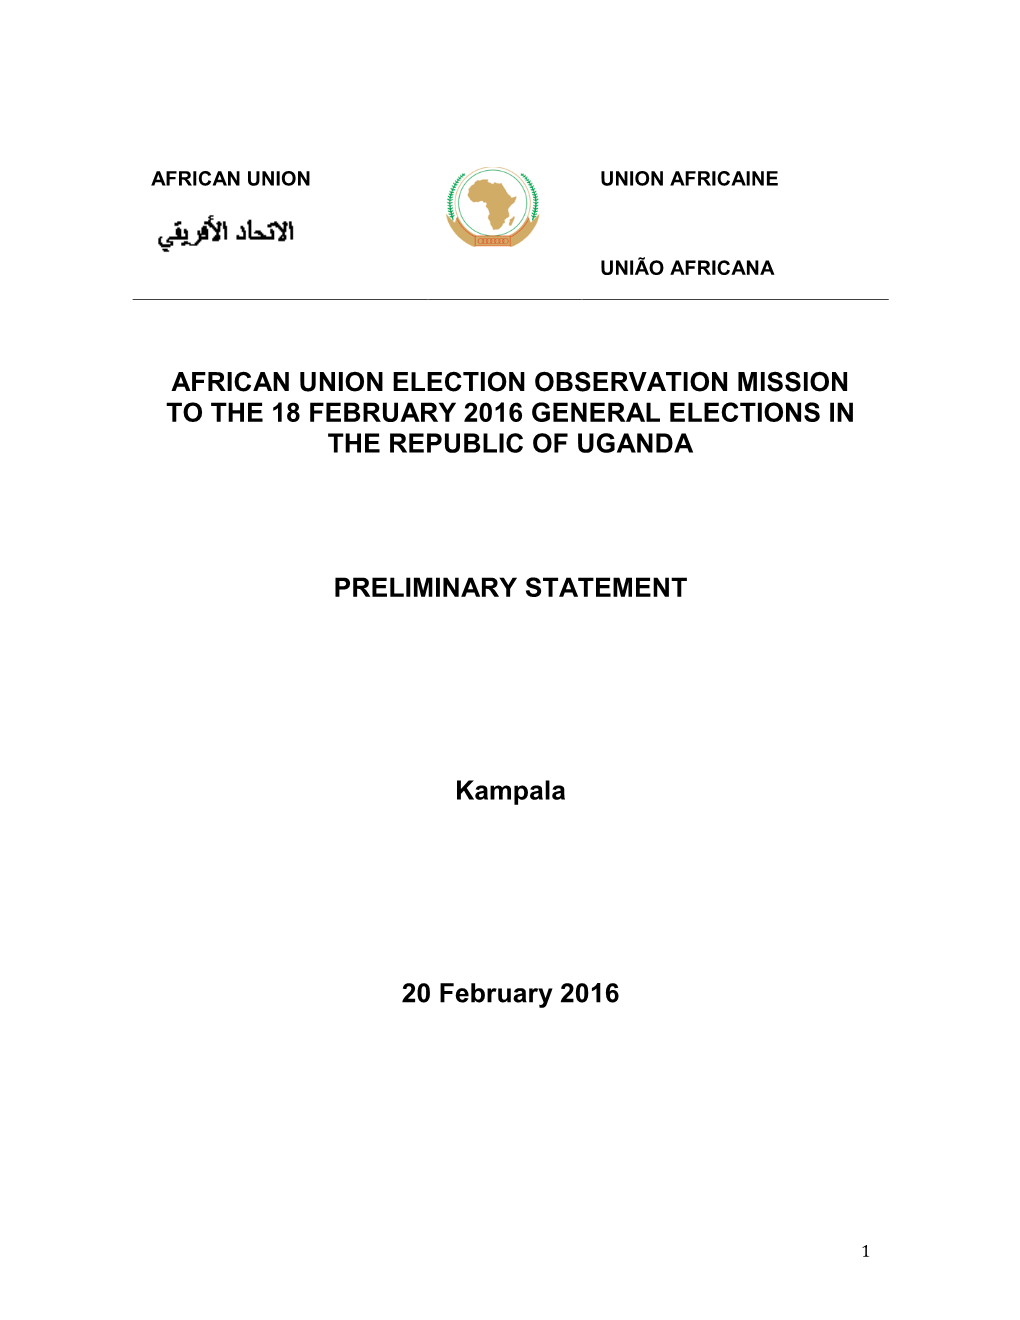 African Union Election Observation Mission to the 18 February 2016 General Elections in the Republic of Uganda